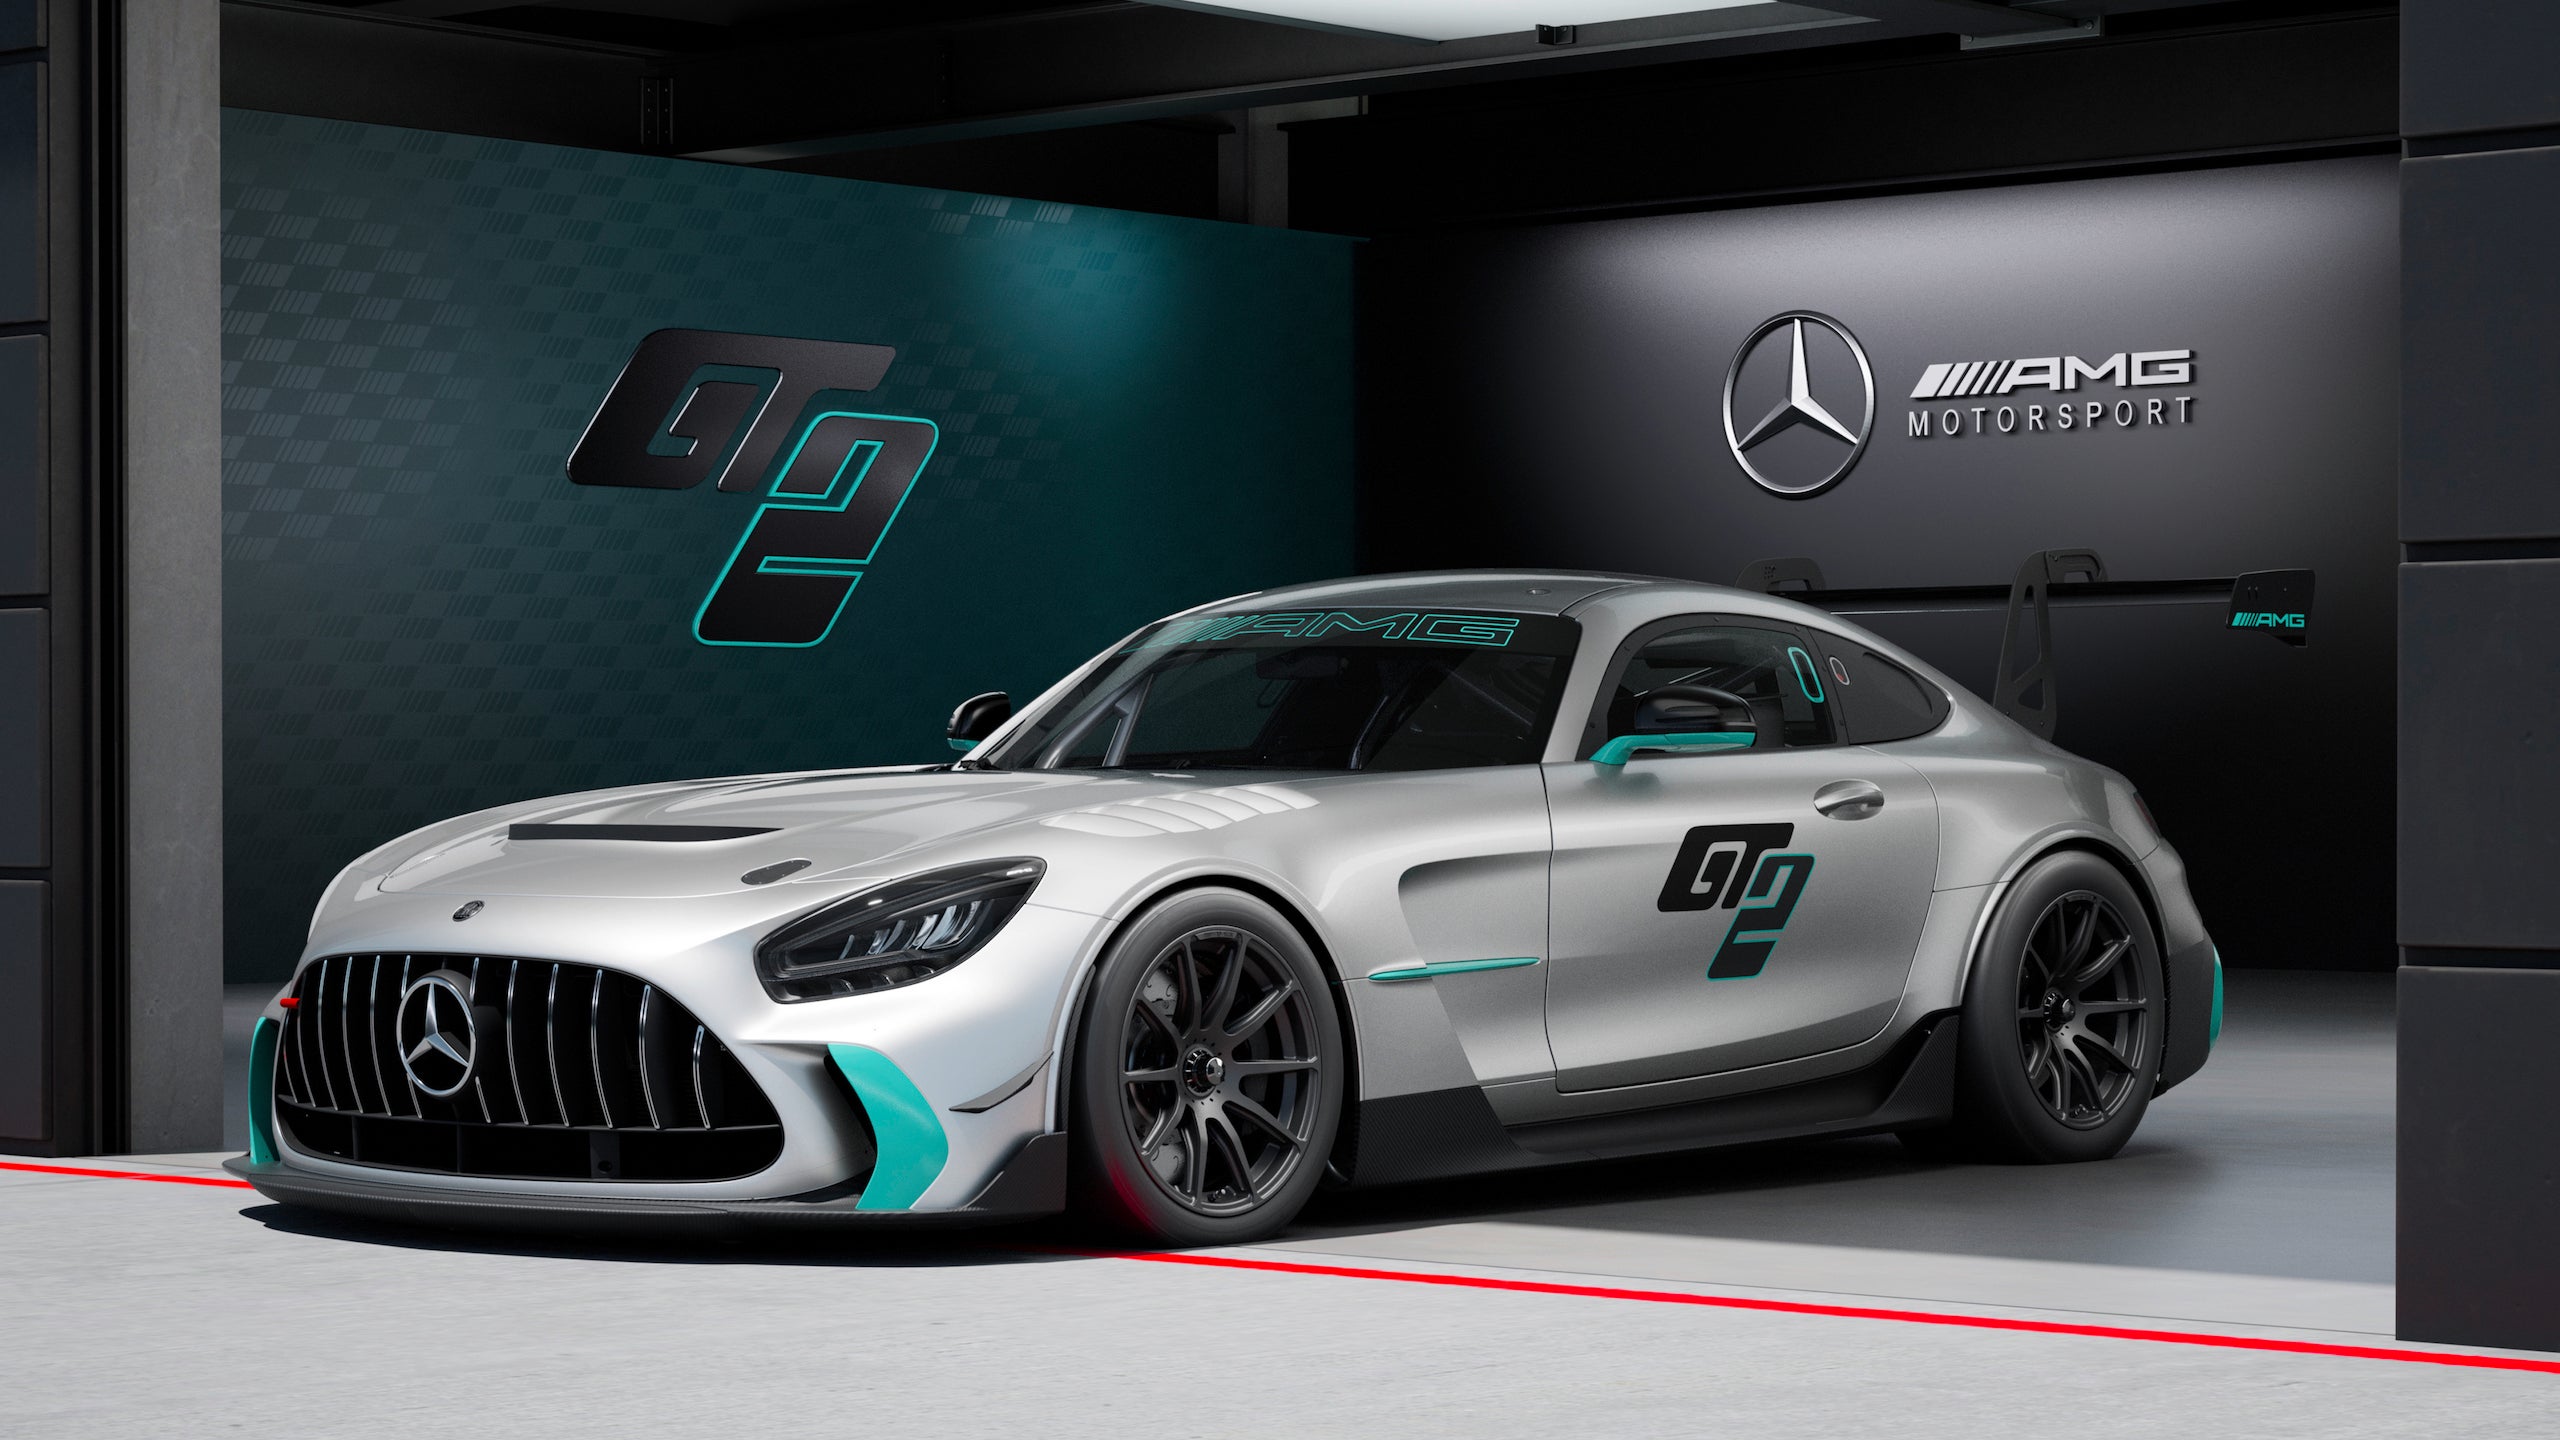 Buy Mercedes-AMG’s 707-HP GT2 Racer, Its Most Powerful Customer Race Car Yet